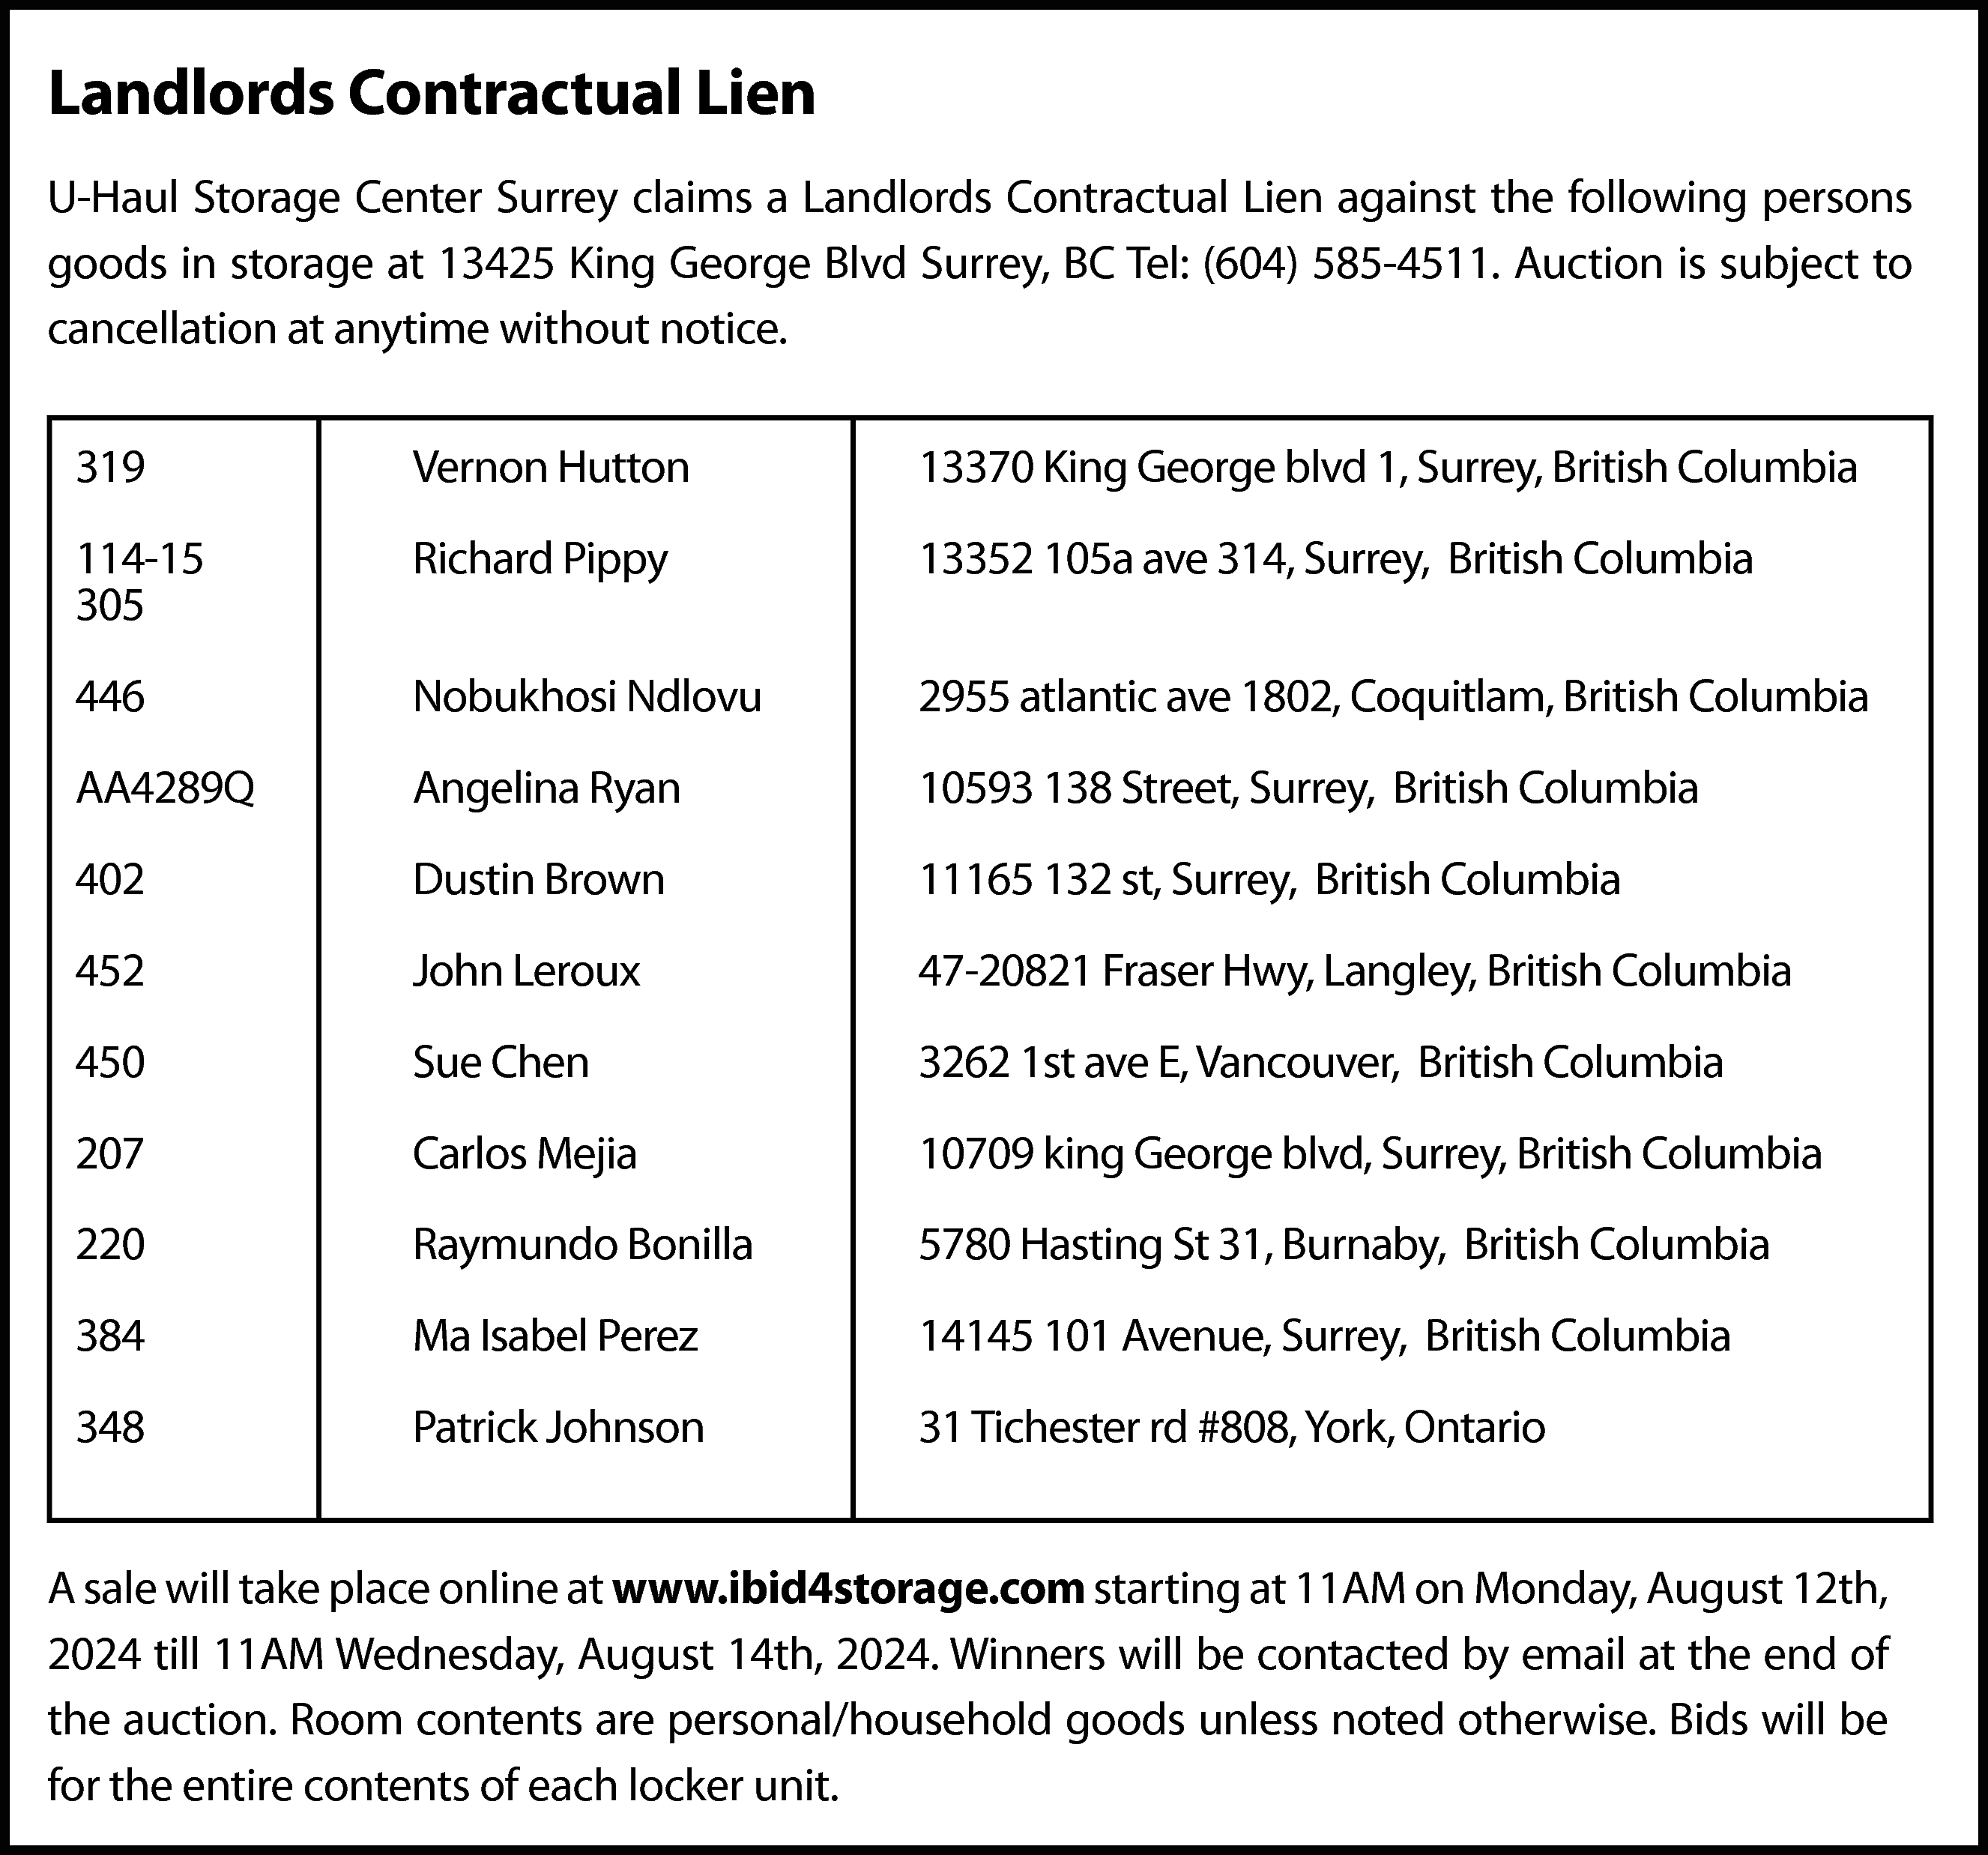 Landlords Contractual Lien <br>U-Haul Storage  Landlords Contractual Lien  U-Haul Storage Center Surrey claims a Landlords Contractual Lien against the following persons  goods in storage at 13425 King George Blvd Surrey, BC Tel: (604) 585-4511. Auction is subject to  cancellation at anytime without notice.  319    Vernon Hutton    13370 King George blvd 1, Surrey, British Columbia    114-15  305    Richard Pippy    13352 105a ave 314, Surrey, British Columbia    446    Nobukhosi Ndlovu    2955 atlantic ave 1802, Coquitlam, British Columbia    AA4289Q    Angelina Ryan    10593 138 Street, Surrey, British Columbia    402    Dustin Brown    11165 132 st, Surrey, British Columbia    452    John Leroux    47-20821 Fraser Hwy, Langley, British Columbia    450    Sue Chen    3262 1st ave E, Vancouver, British Columbia    207    Carlos Mejia    10709 king George blvd, Surrey, British Columbia    220    Raymundo Bonilla    5780 Hasting St 31, Burnaby, British Columbia    384    Ma Isabel Perez    14145 101 Avenue, Surrey, British Columbia    348    Patrick Johnson    31 Tichester rd #808, York, Ontario    A sale will take place online at www.ibid4storage.com starting at 11AM on Monday, August 12th,  2024 till 11AM Wednesday, August 14th, 2024. Winners will be contacted by email at the end of  the auction. Room contents are personal/household goods unless noted otherwise. Bids will be  for the entire contents of each locker unit.    